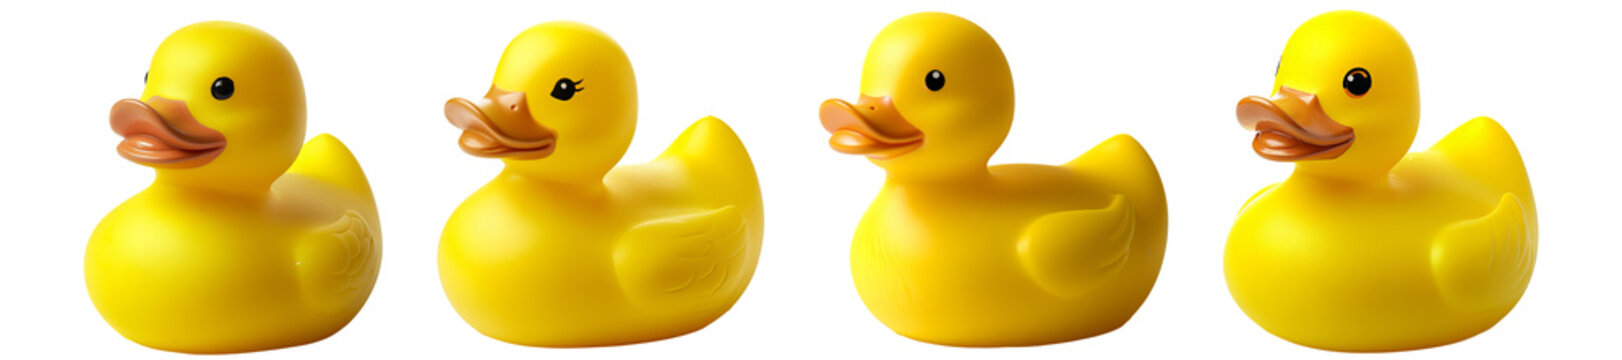 Set of yellow rubber ducks, PNG Collection